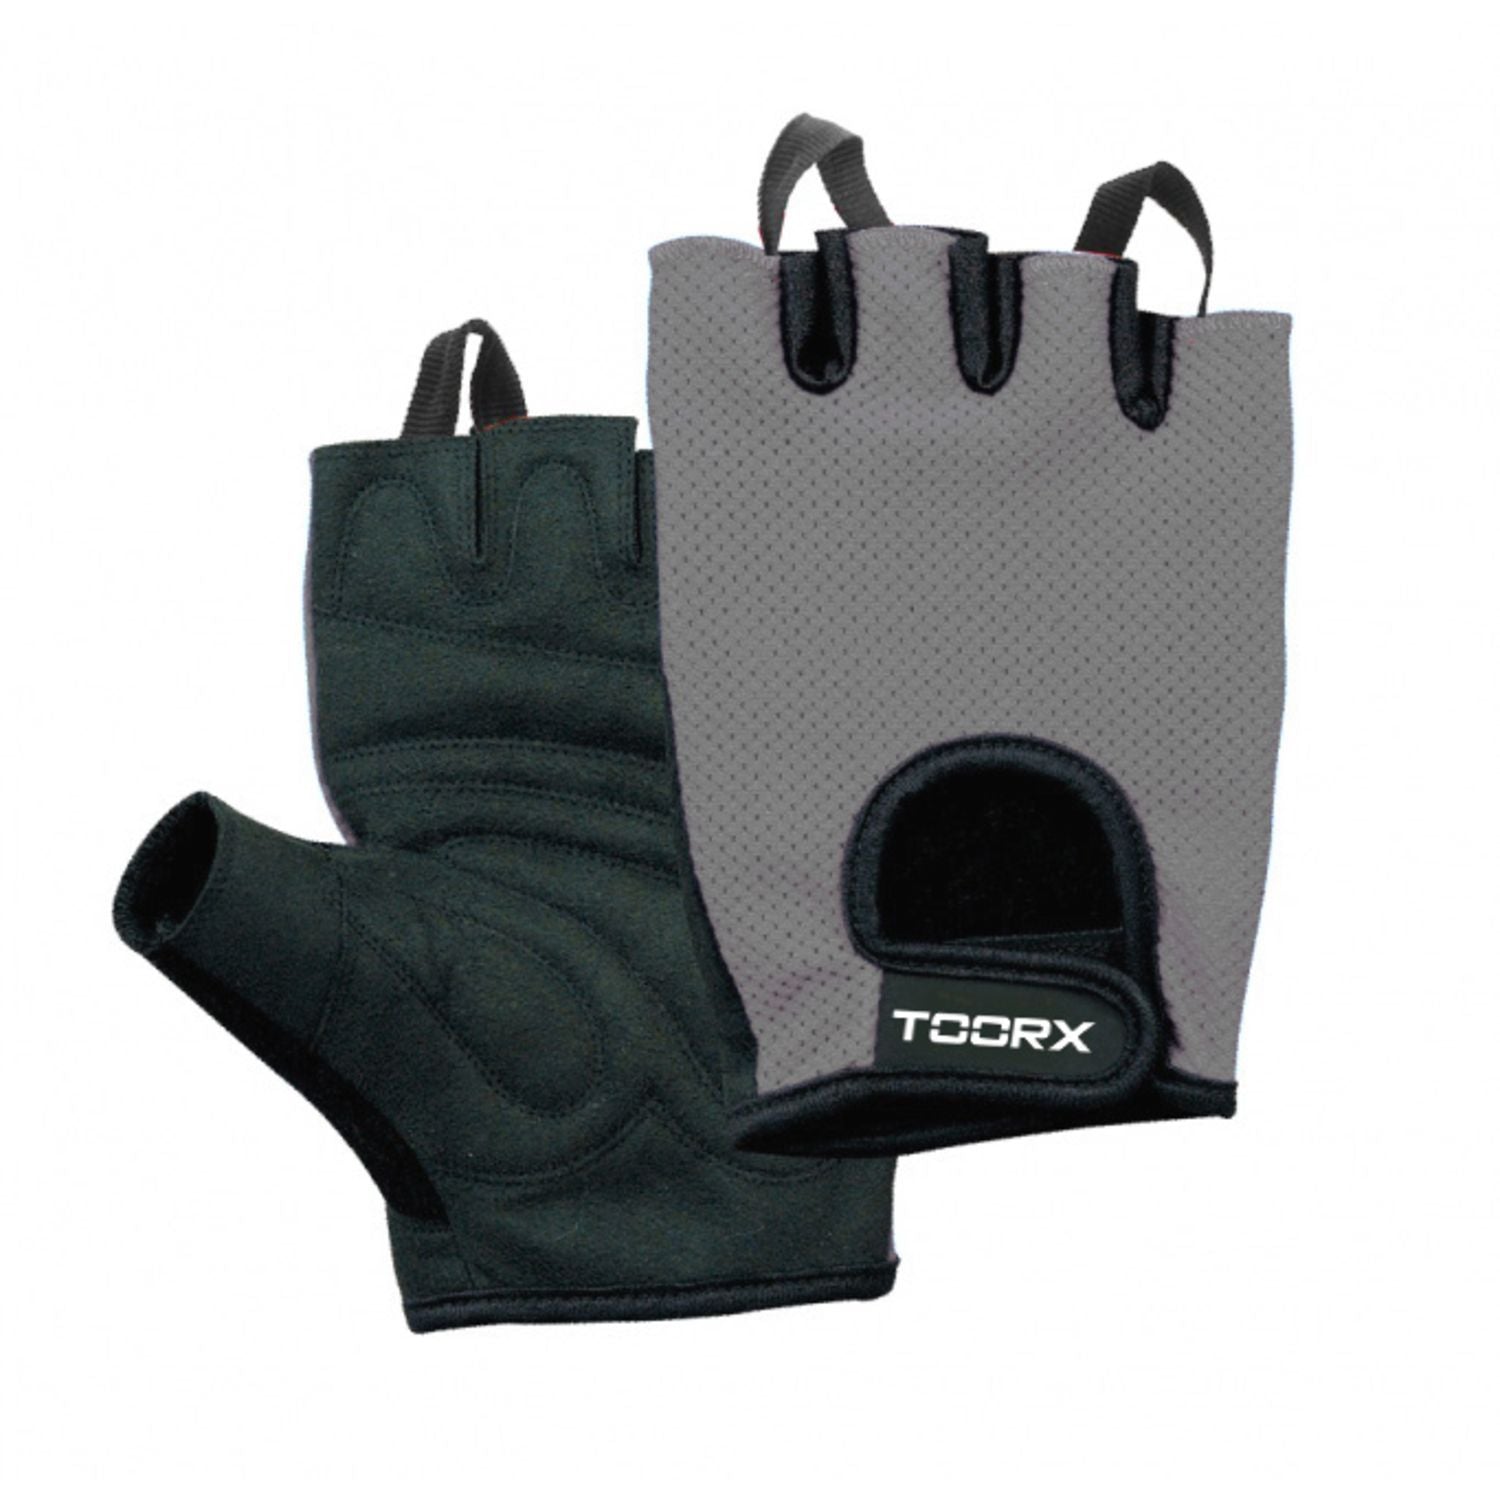 Toorx Suede and micromesh glove AHF-029